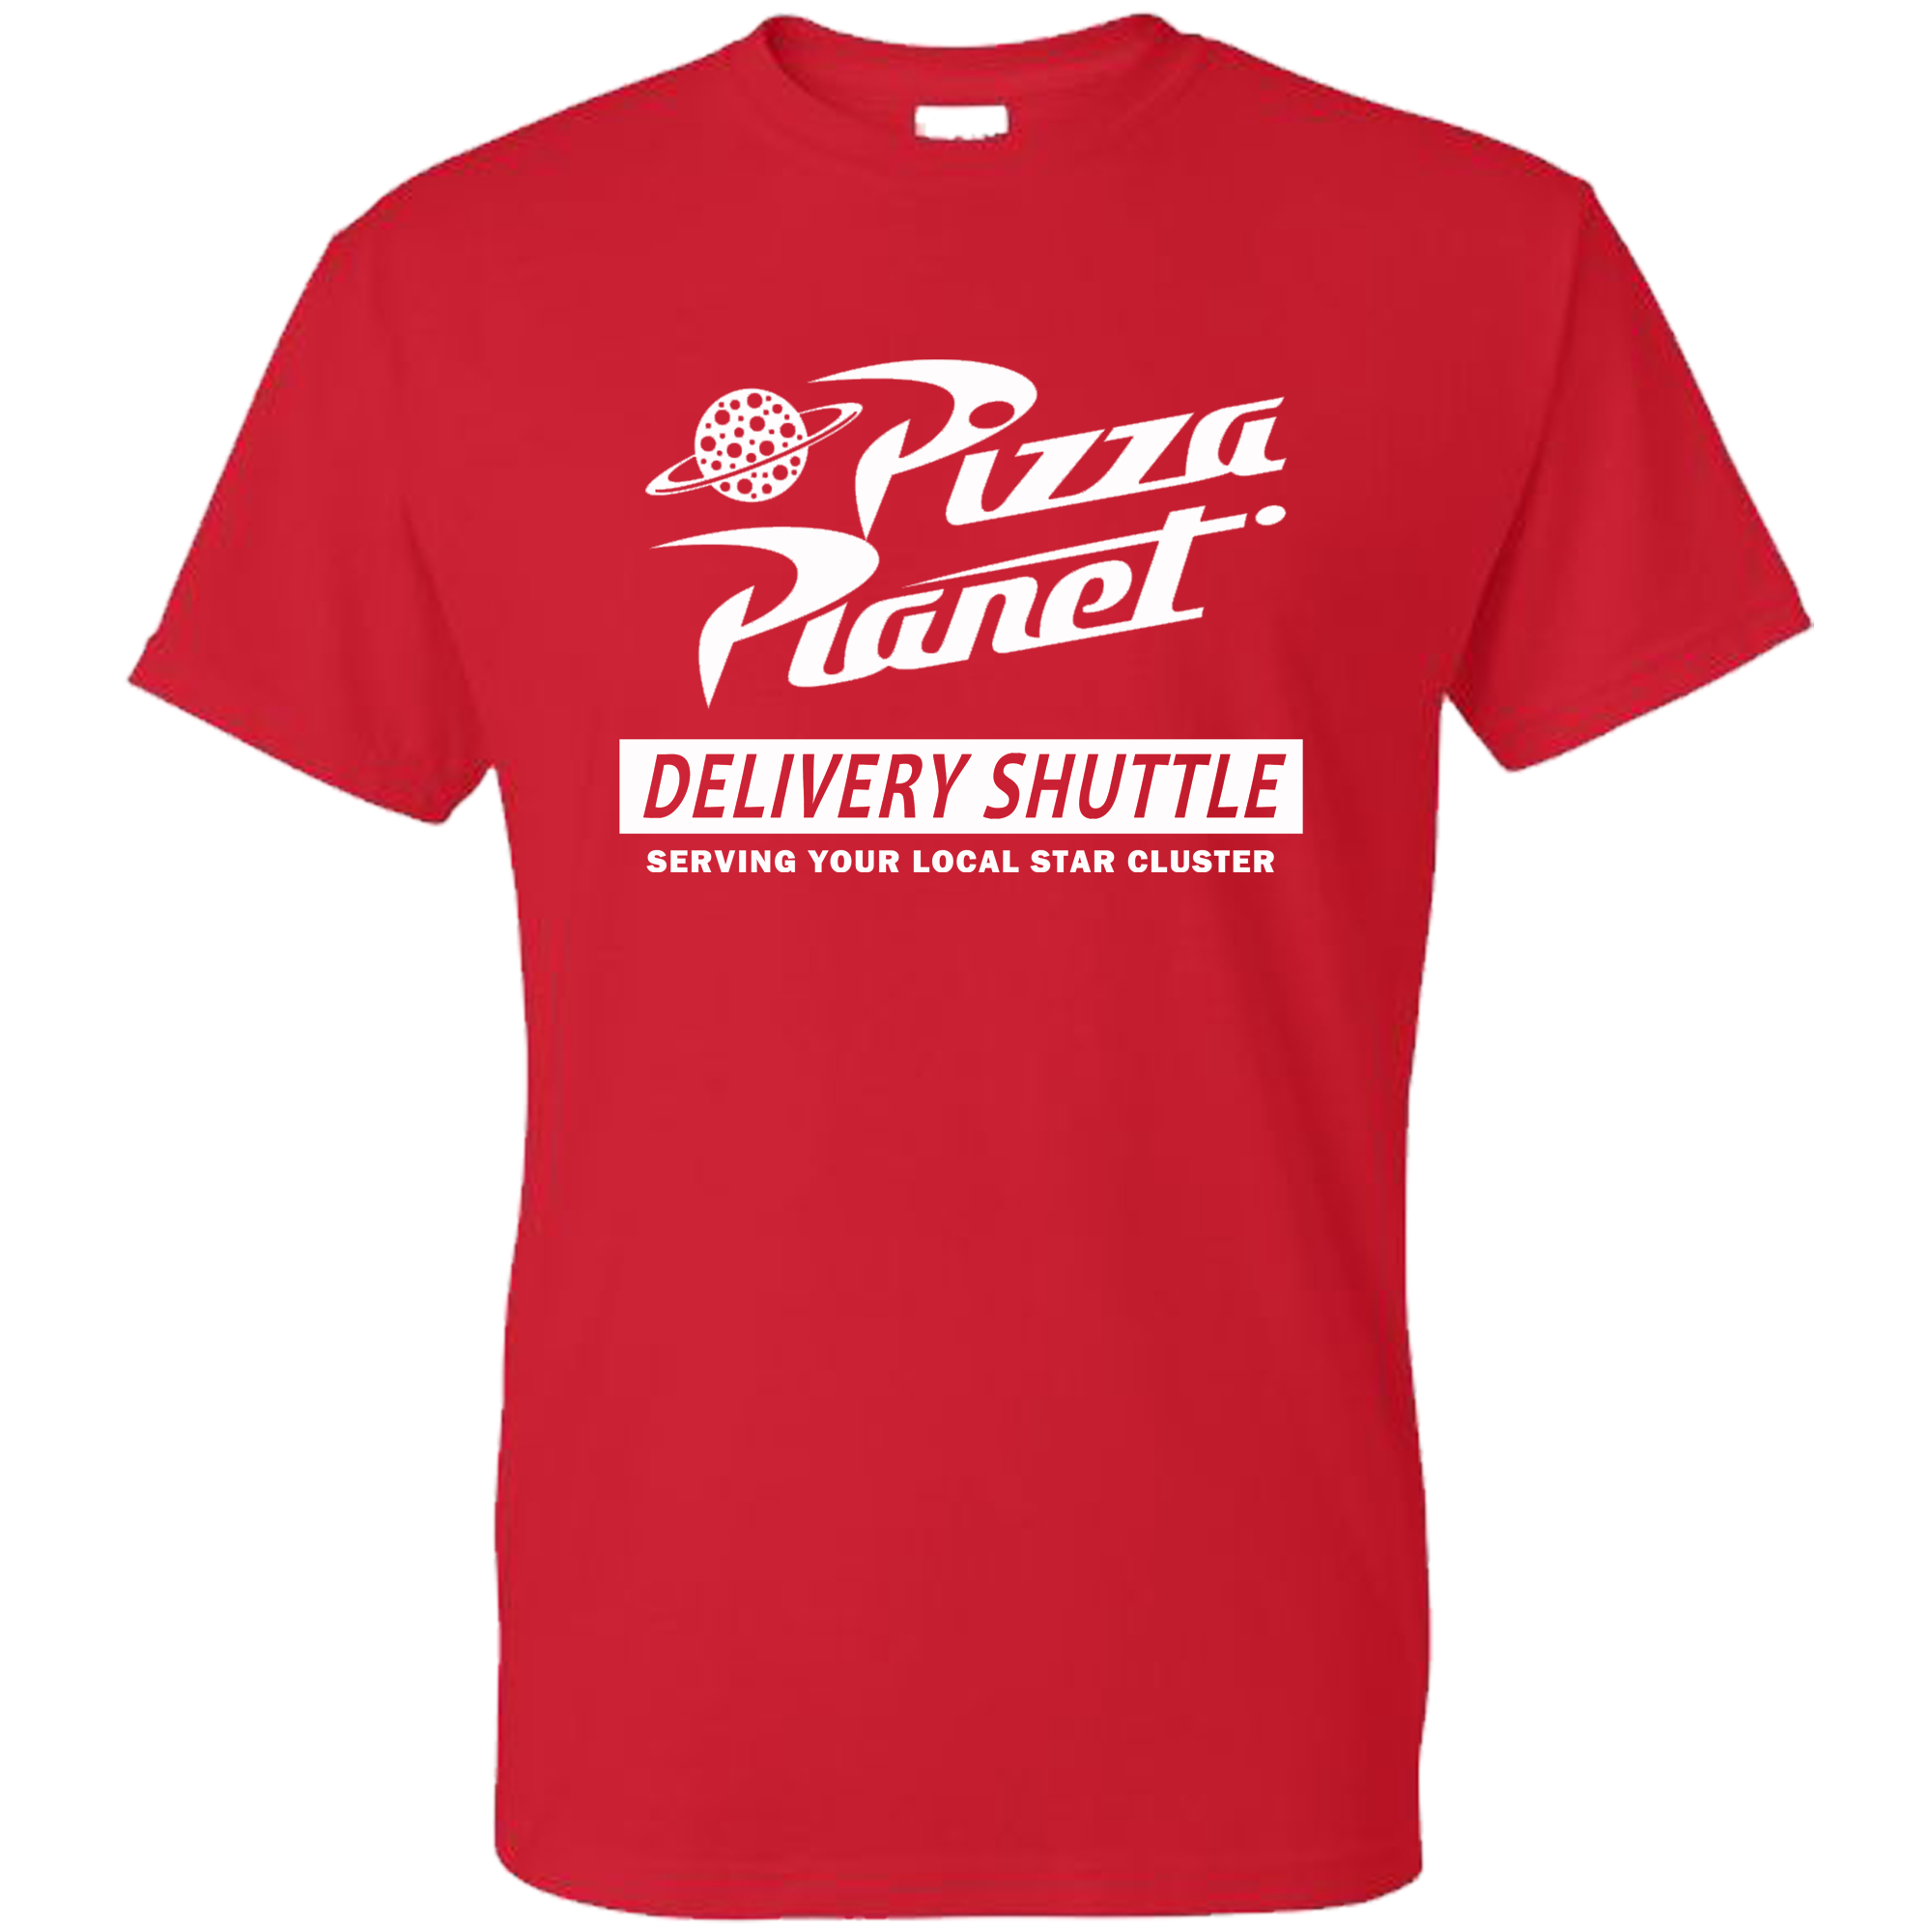 Pizza Planet Shirt, Pizza Planet T-Shirt, Pizza Planet Tee Shirt, Pizza Planet Delivery Shuttle Shirt, Toy Story Shirt